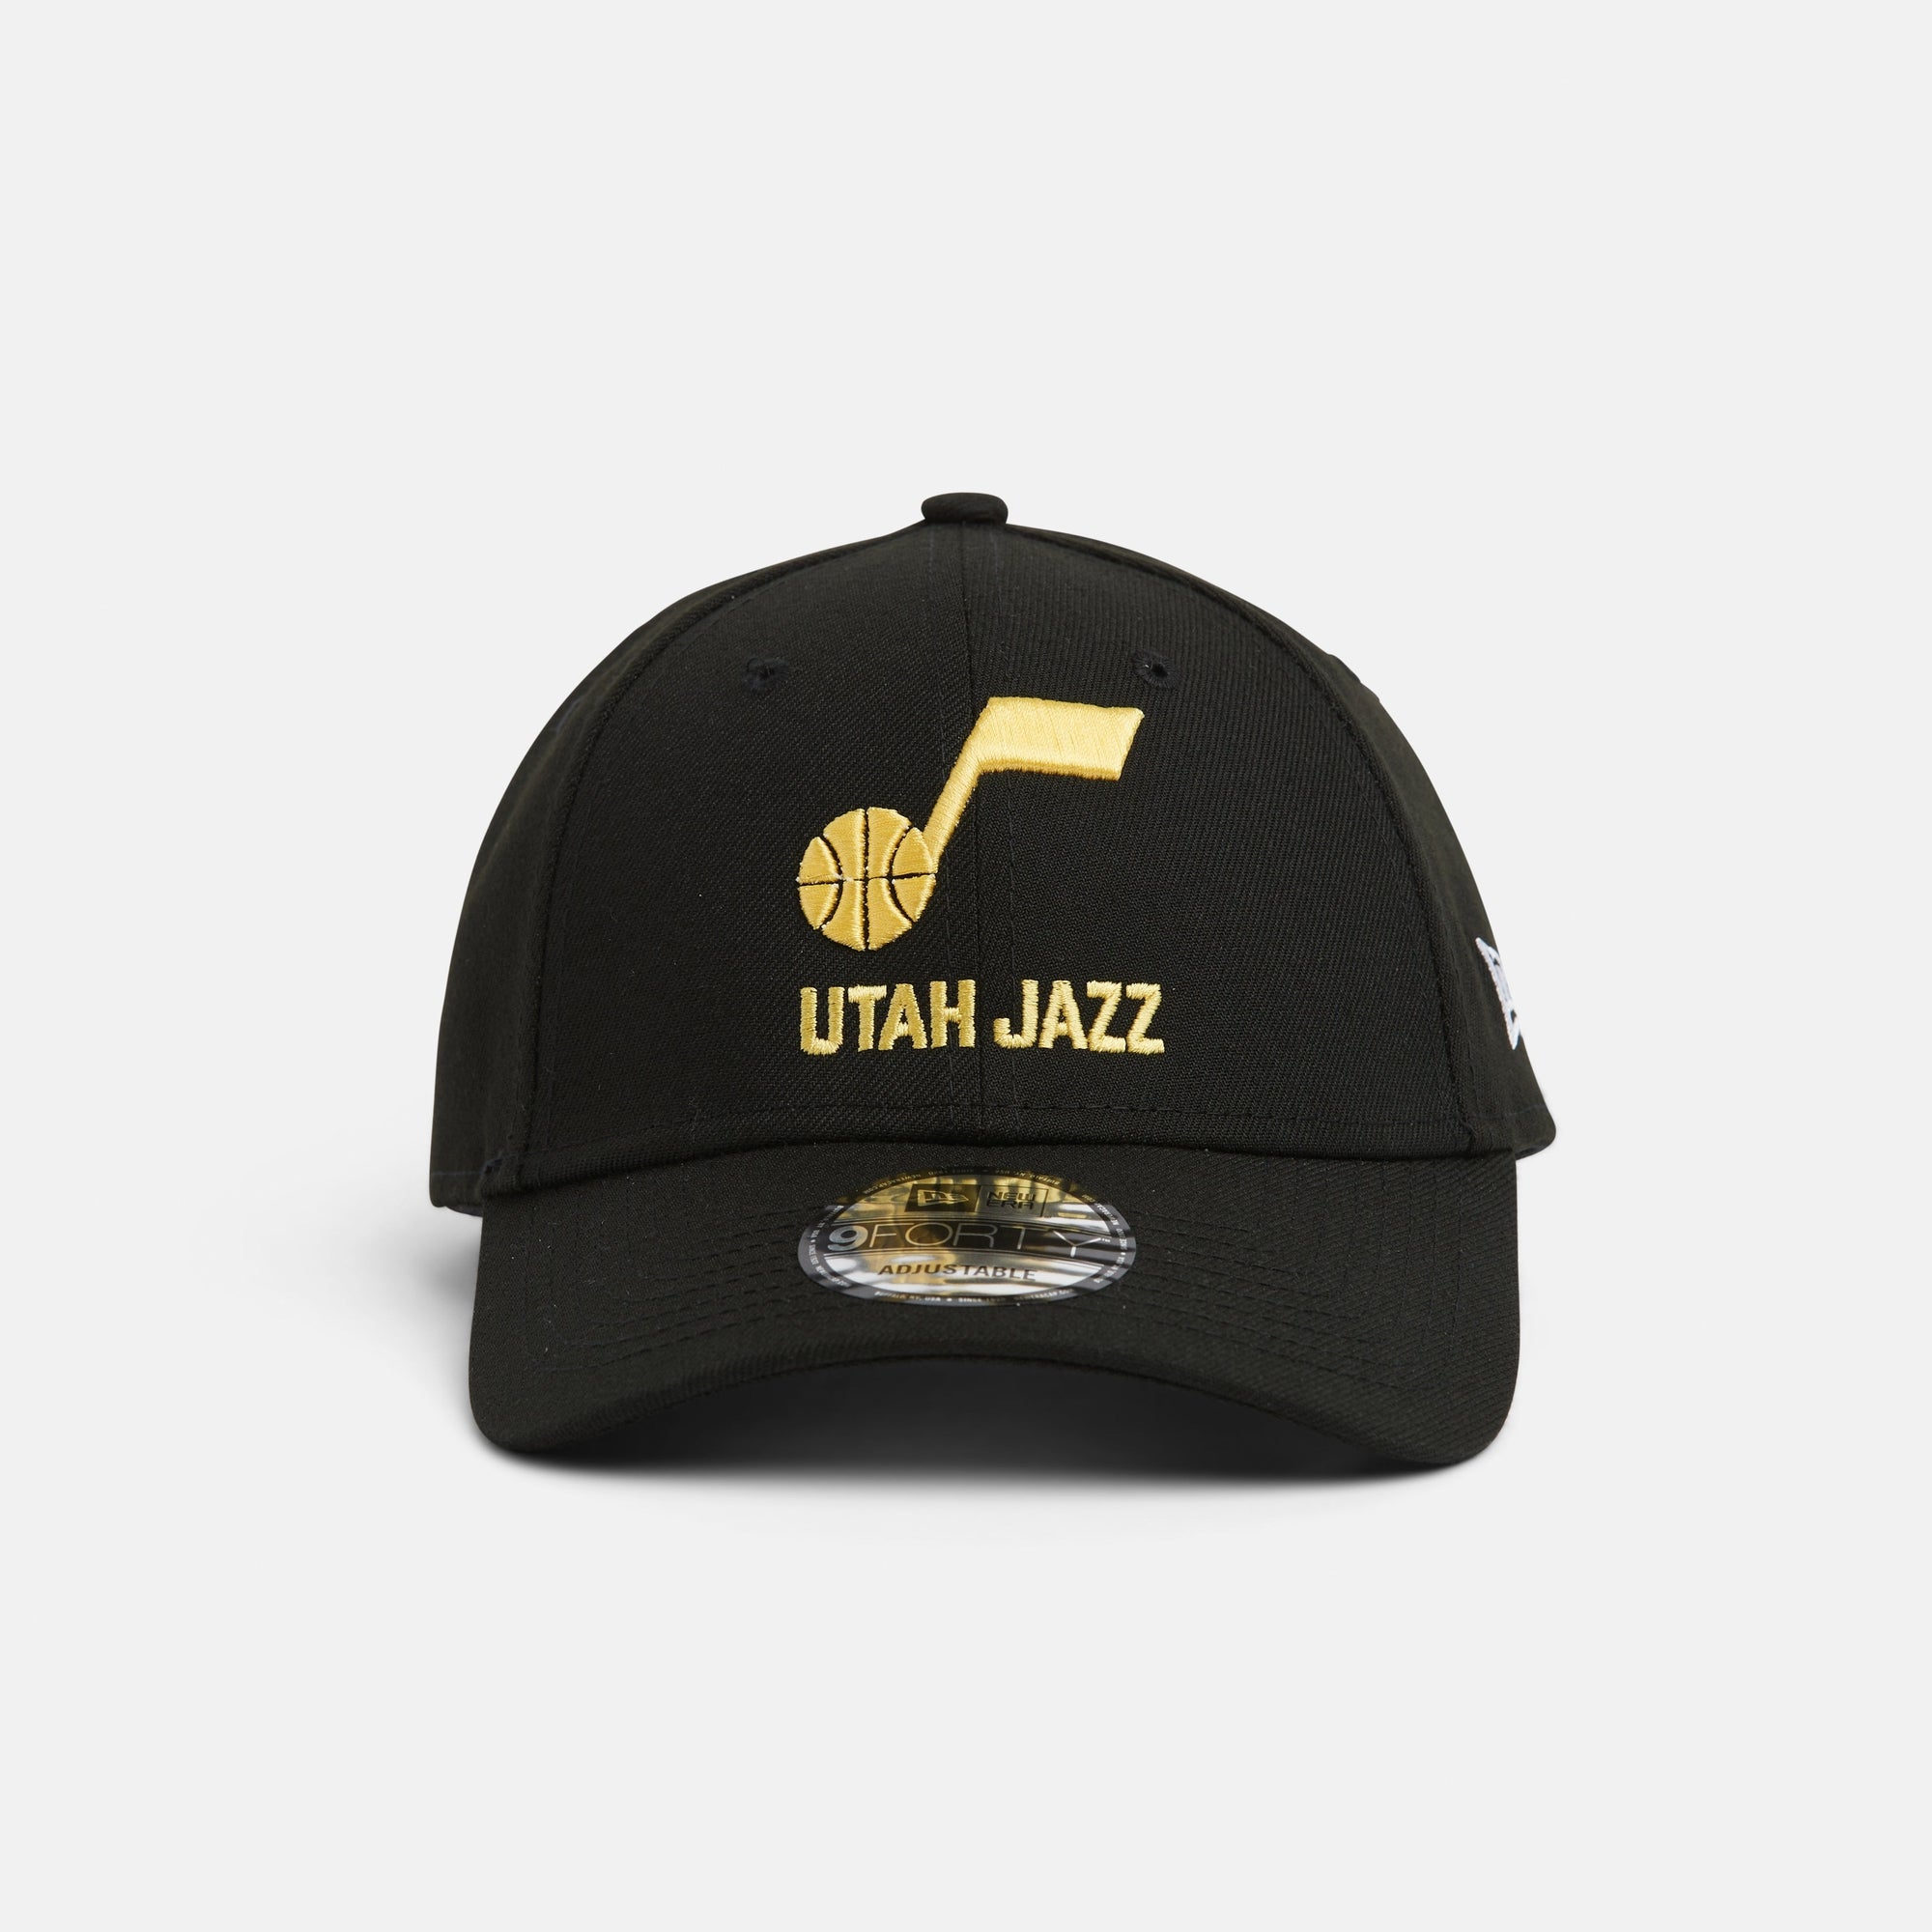 Front black 940 with yellow note and Utah Jazz wordmark logo.